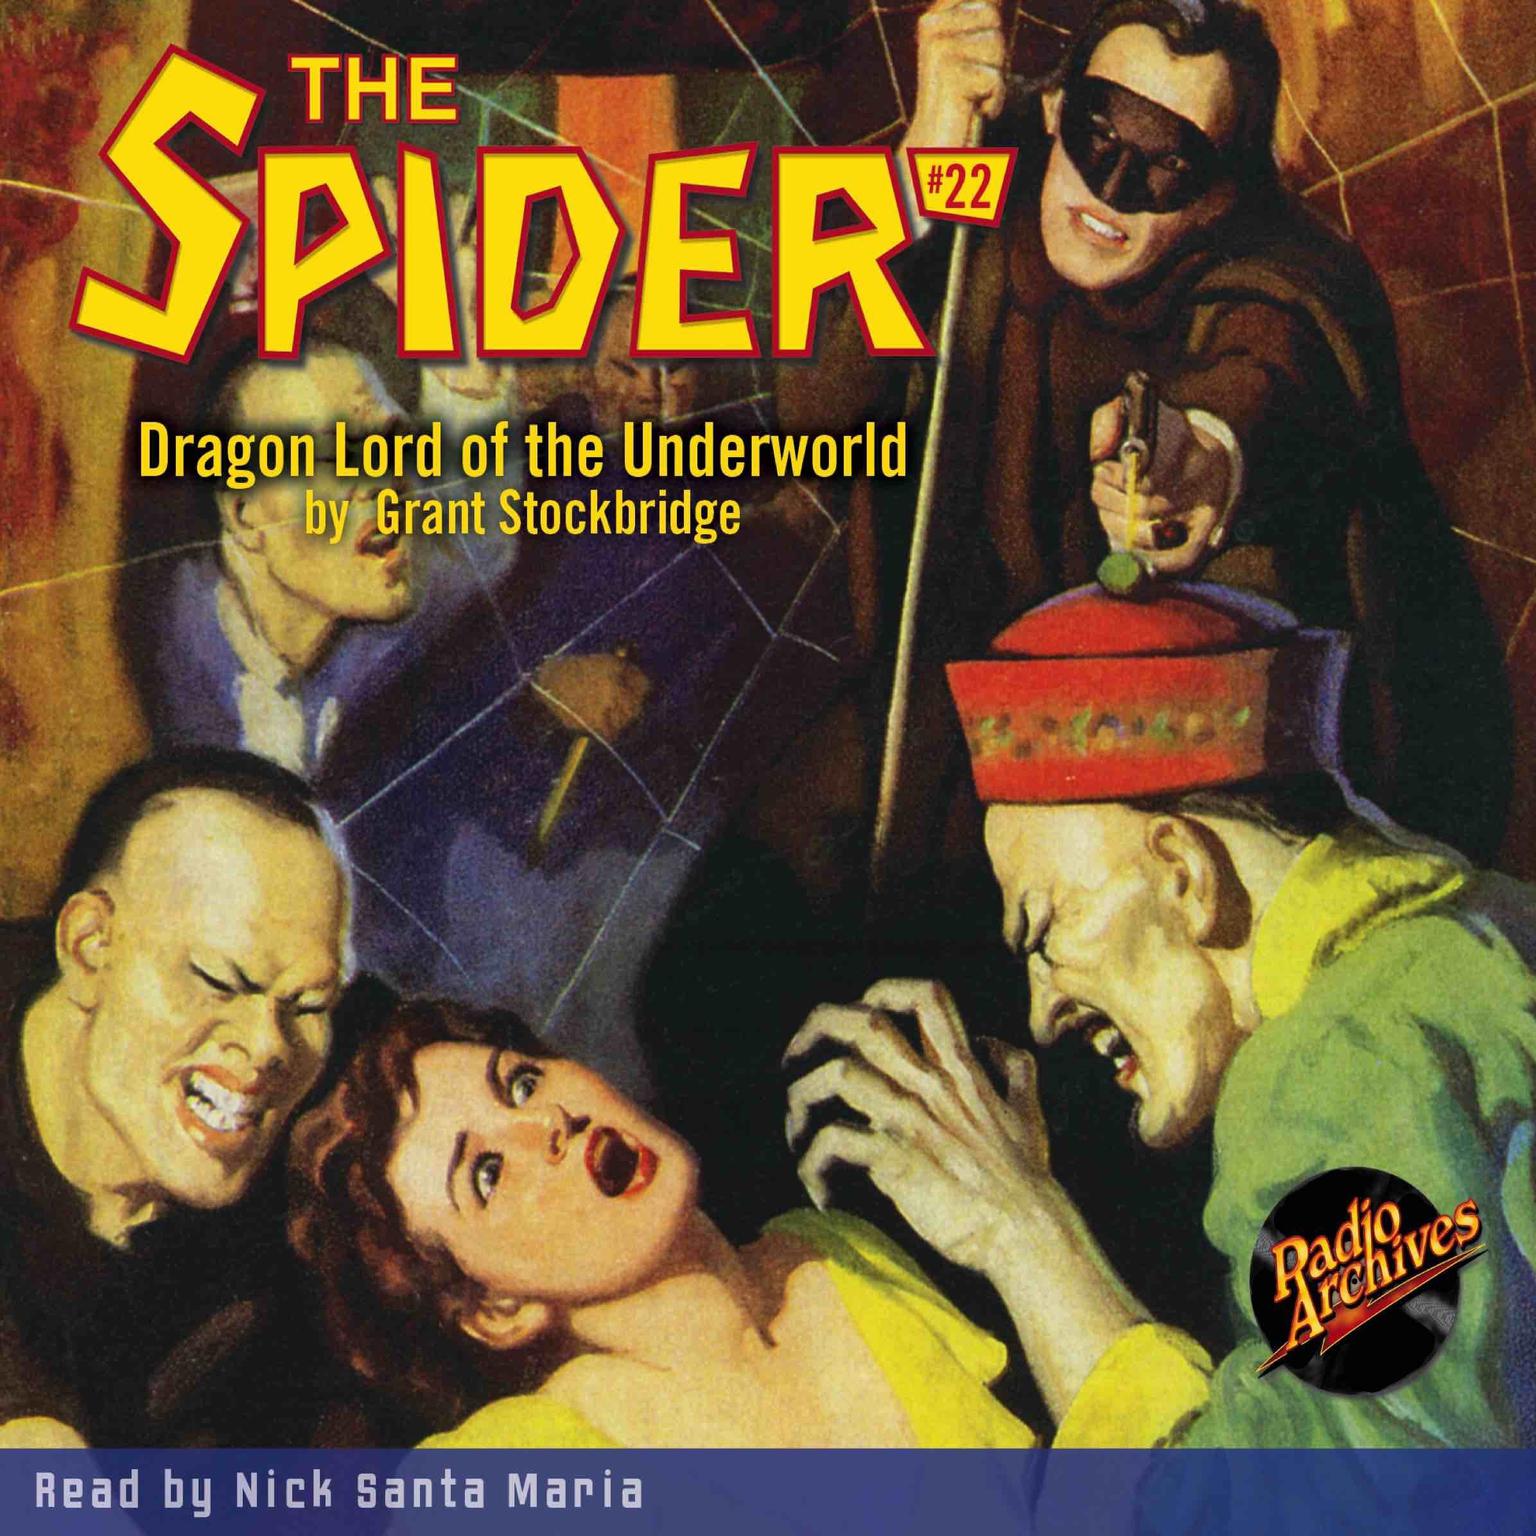 Spider #22, The: Dragon Lord of the Underworld Audiobook, by Grant Stockbridge